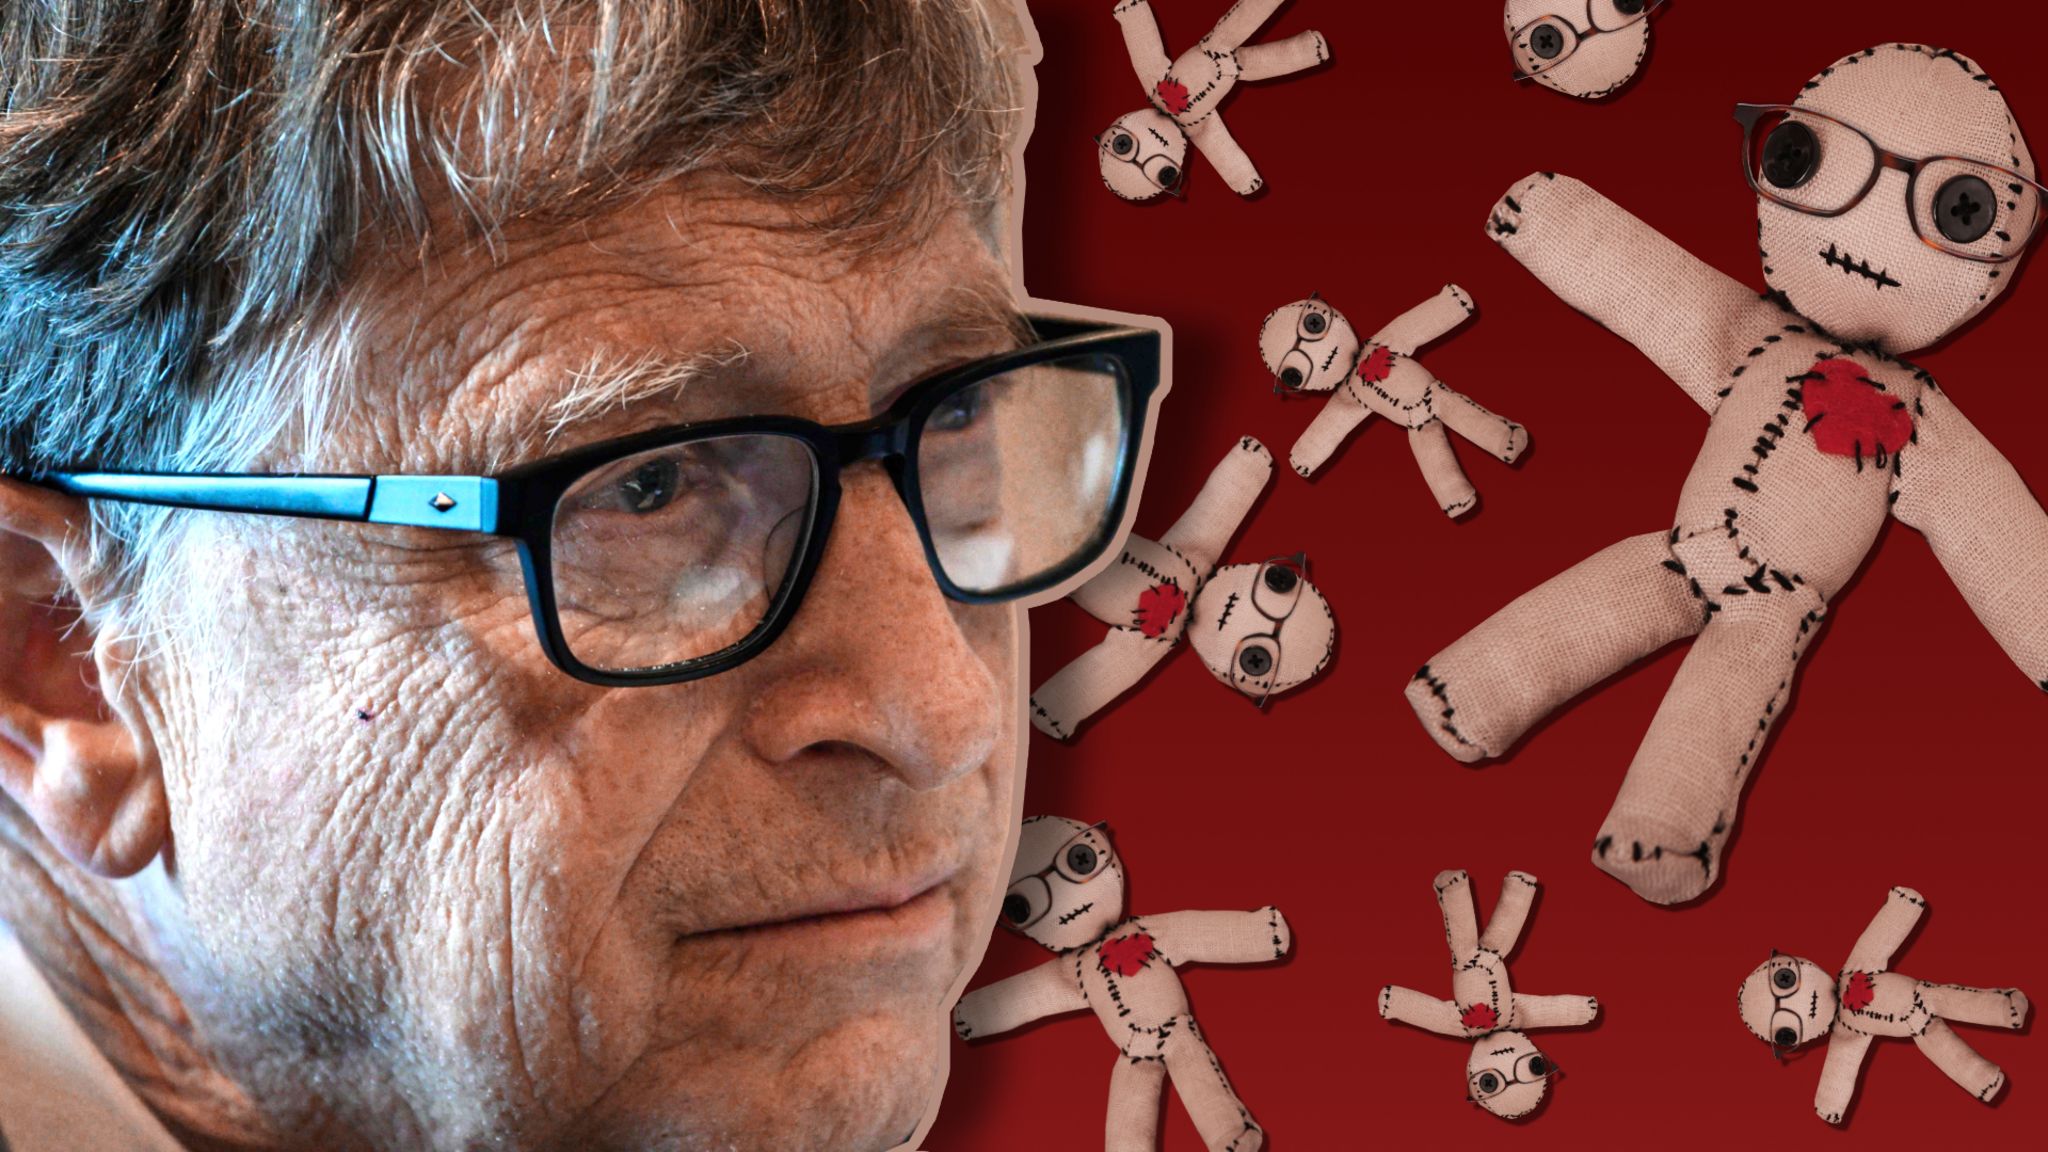 Bill Gates next to images of a voodoo doll